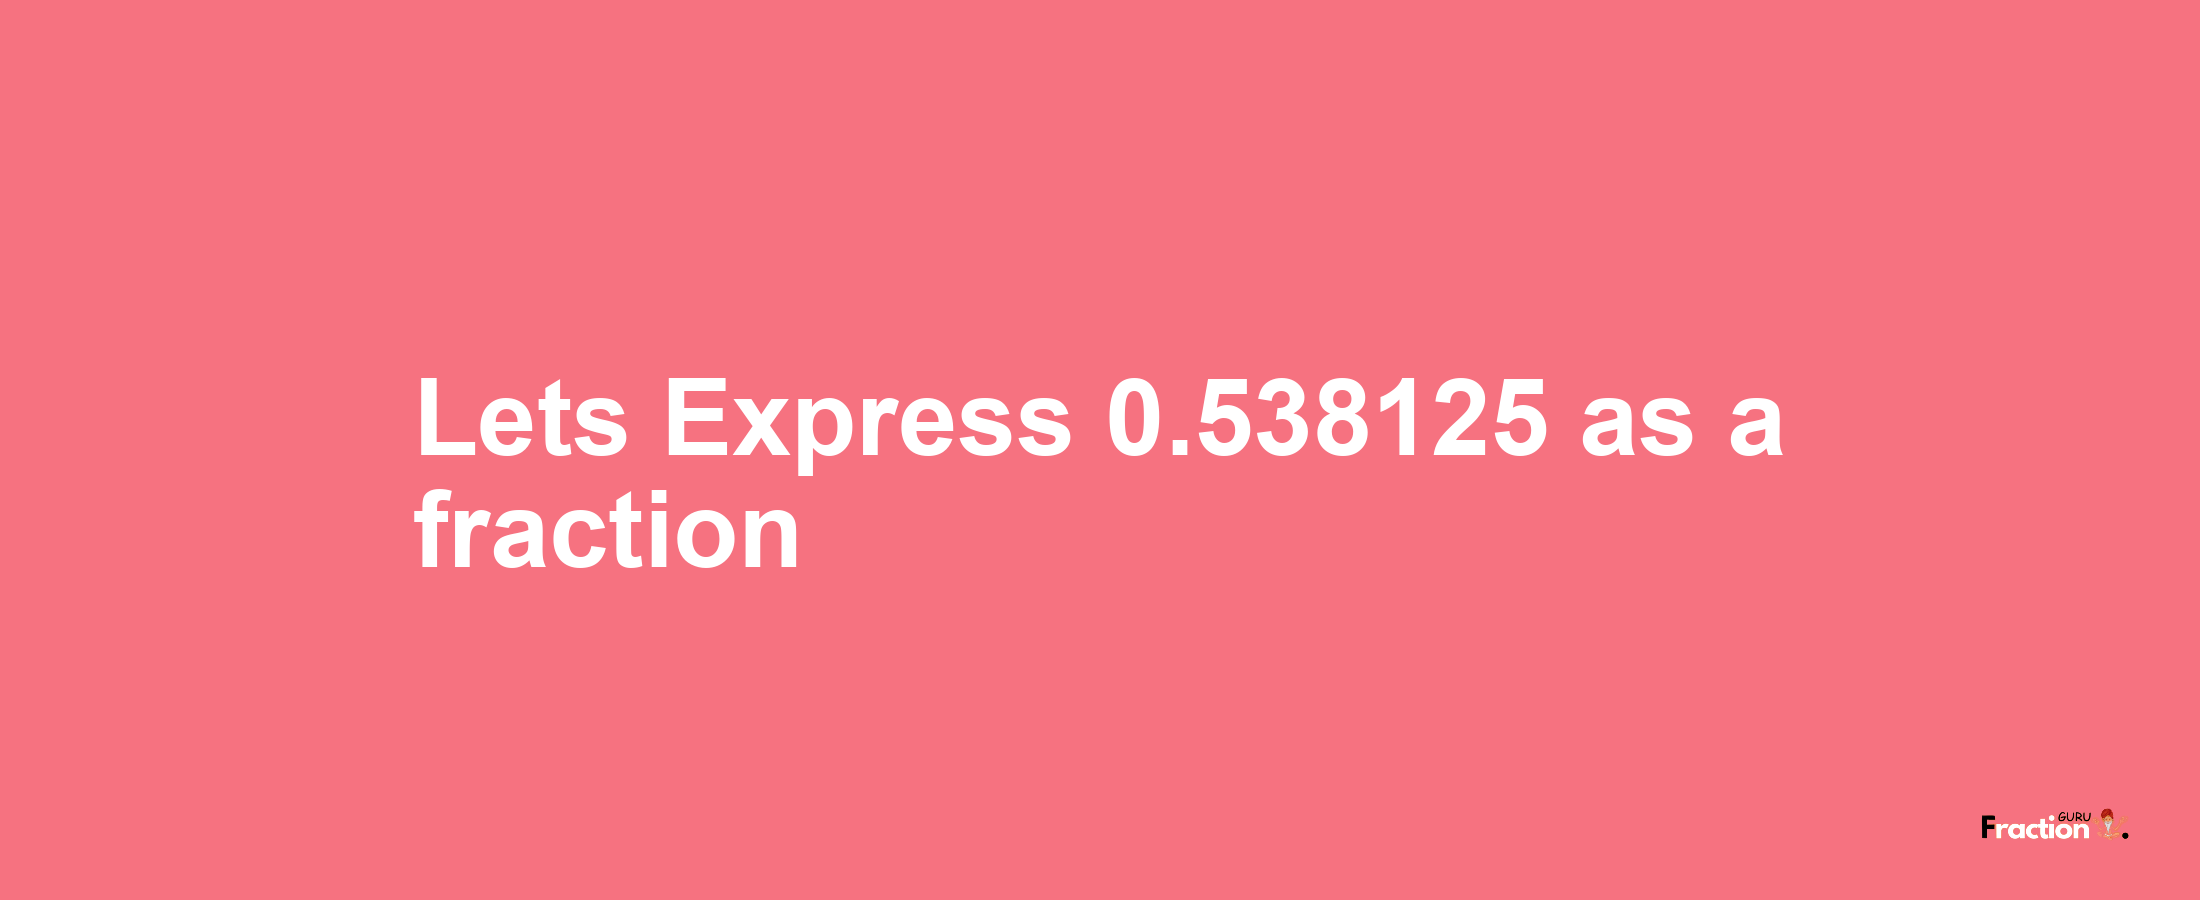 Lets Express 0.538125 as afraction